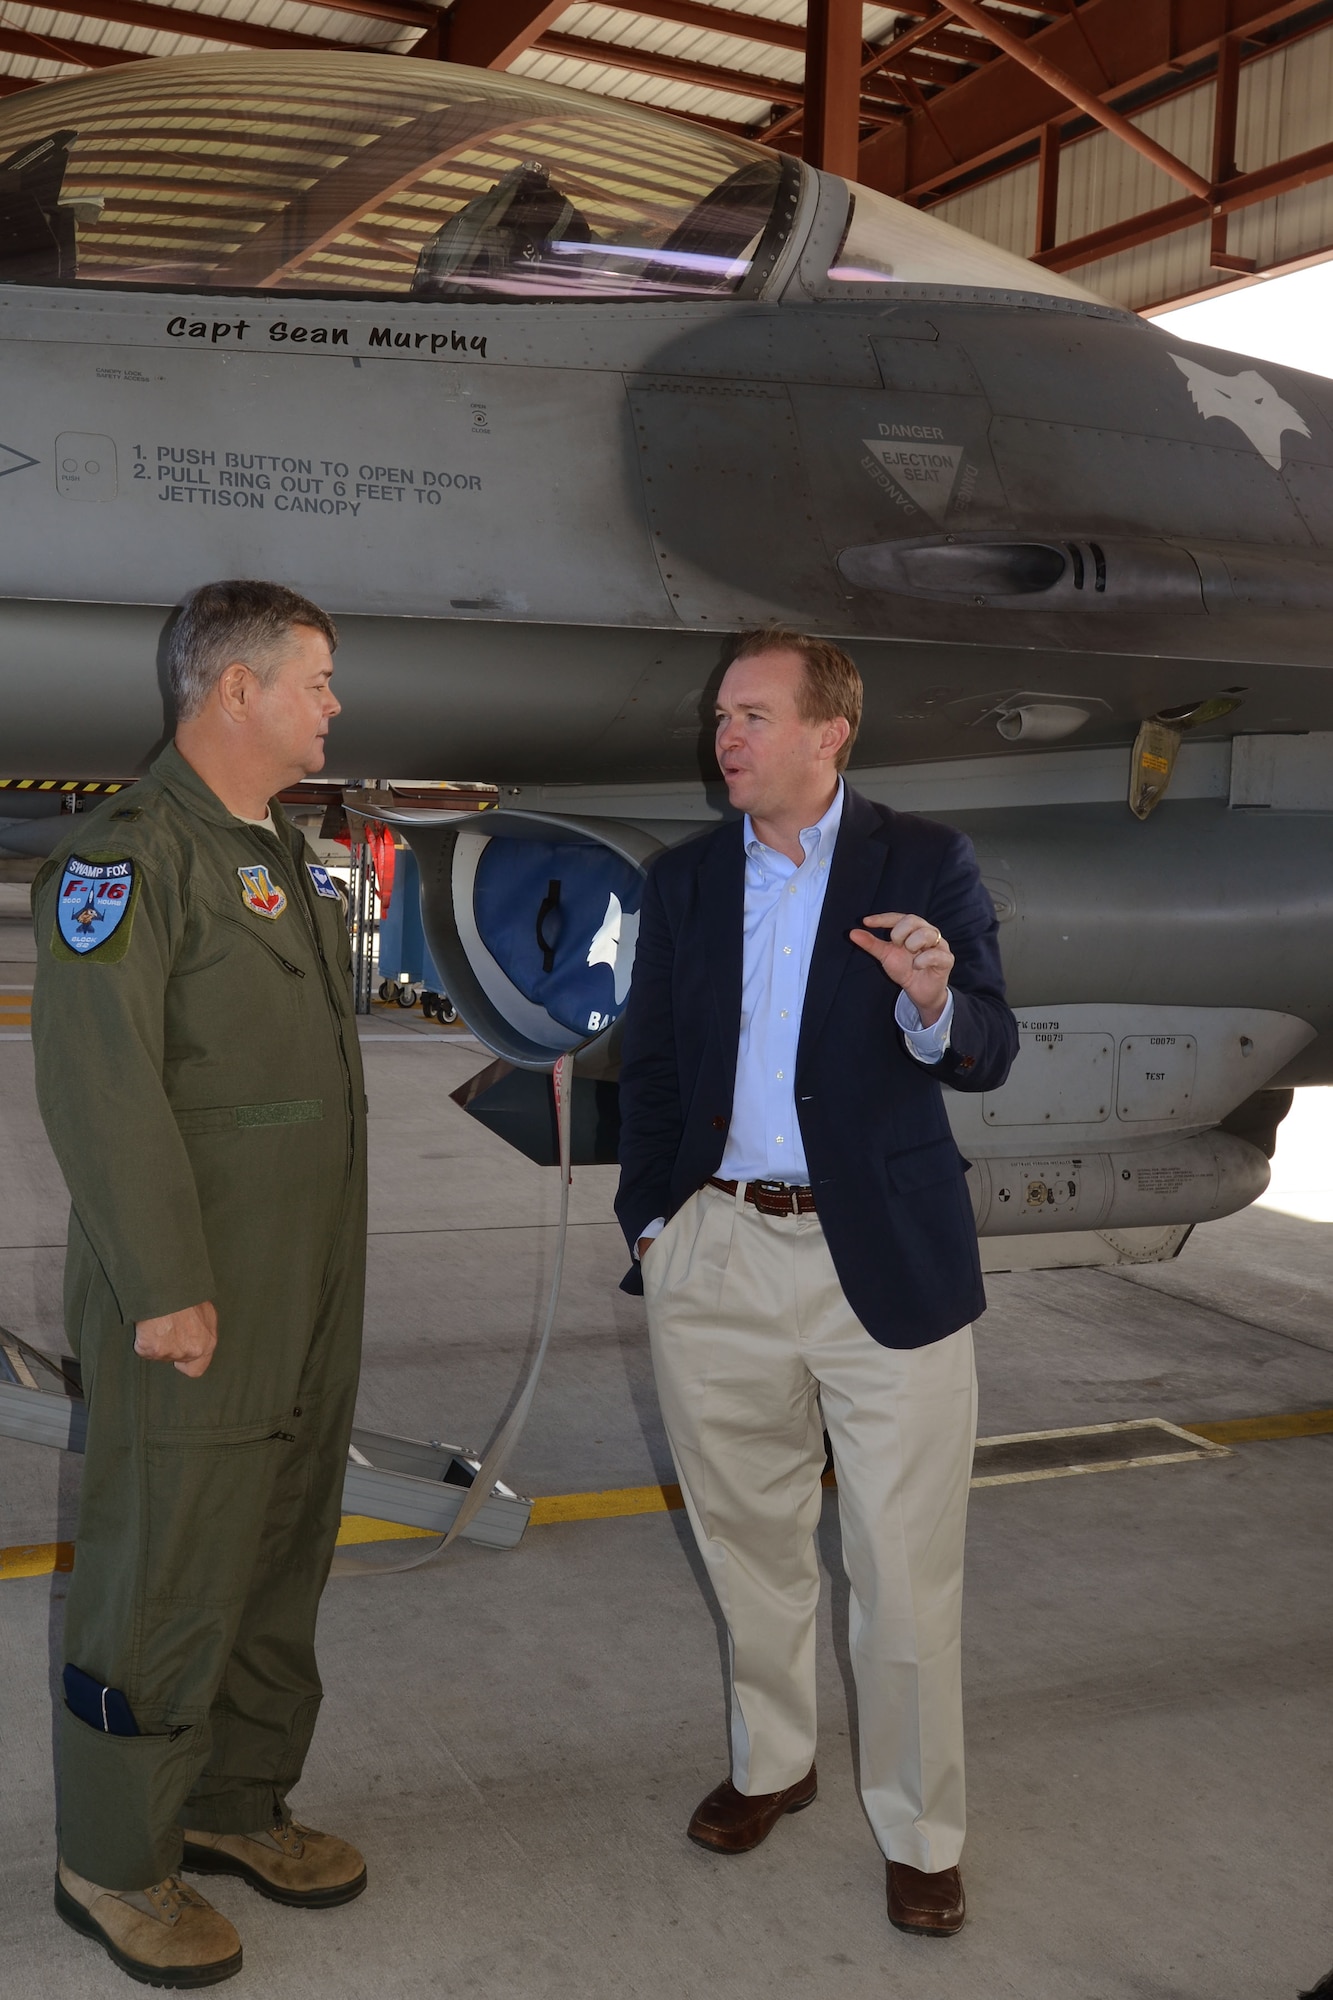 U.S. Air Force Brig. Gen. Michael Hudson, Chief of Staff of the South Carolina Air National Guard, discusses the air superiority capabilities of the F-16 aircraft assigned to the 169th Fighter Wing and the homeland defense mission of the 169th Aerospace Control Alert unit, Nov. 6, 2013. Military leaders of the South Carolina Air National Guard at McEntire Joint National Guard Base hosted a visit to Congressman Mick Mulvaney, U.S. Representative for South Carolina's 5th Congressional District, and to members of the S.C. Military Base Task Force, William L. Bethea, Jr., Chairman of the MBTF, and Charlie Farrell. (U.S. Air National Guard photo by Senior Master Sgt. Edward Snyder/Released)  